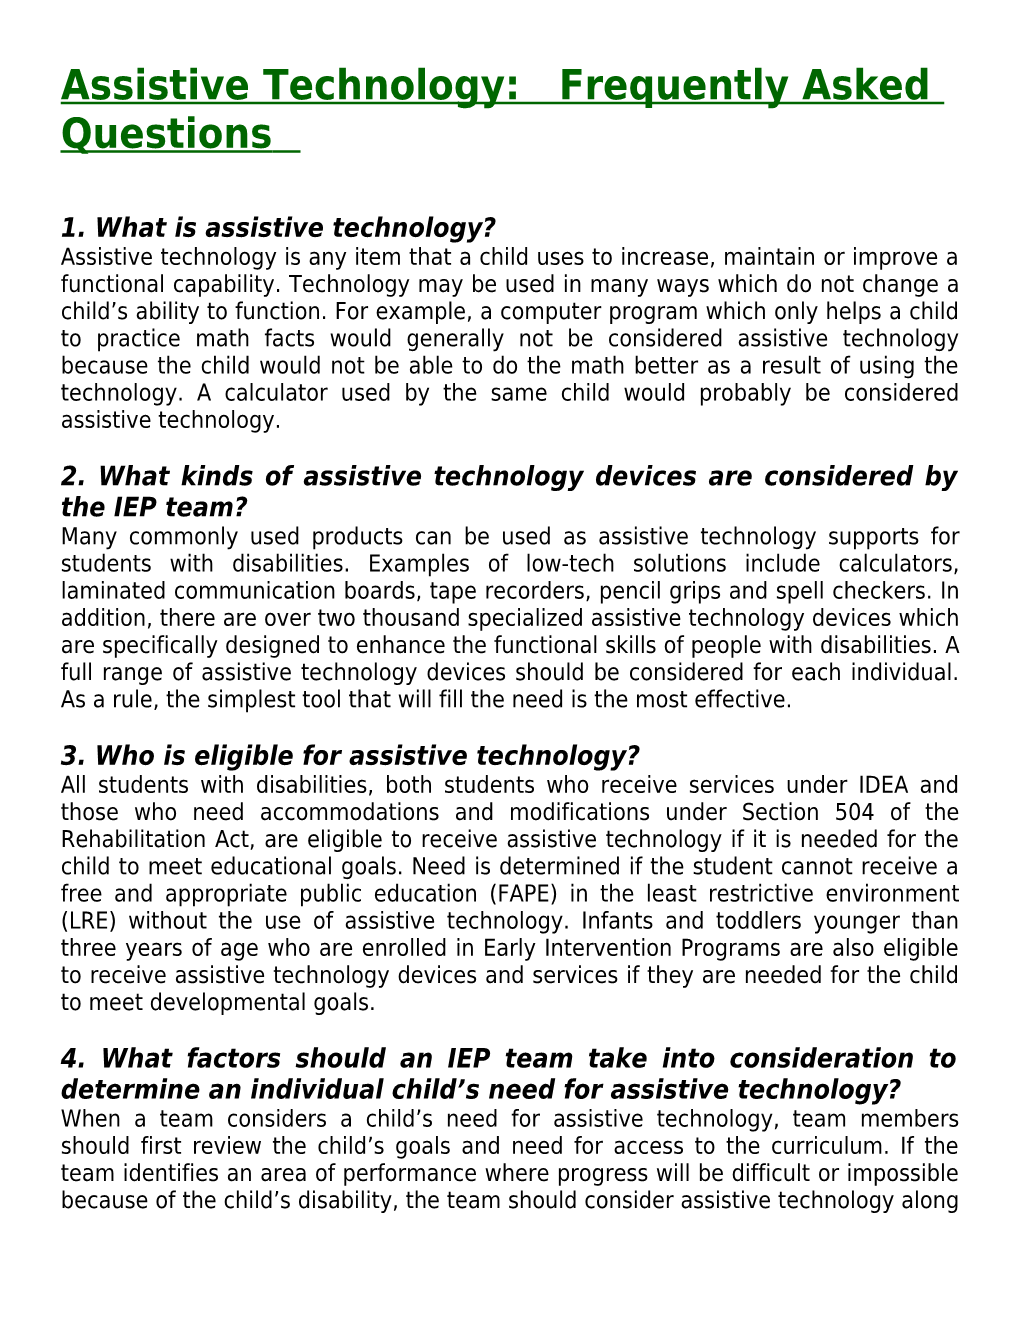 Assistive Technology: Frequently Asked Questions